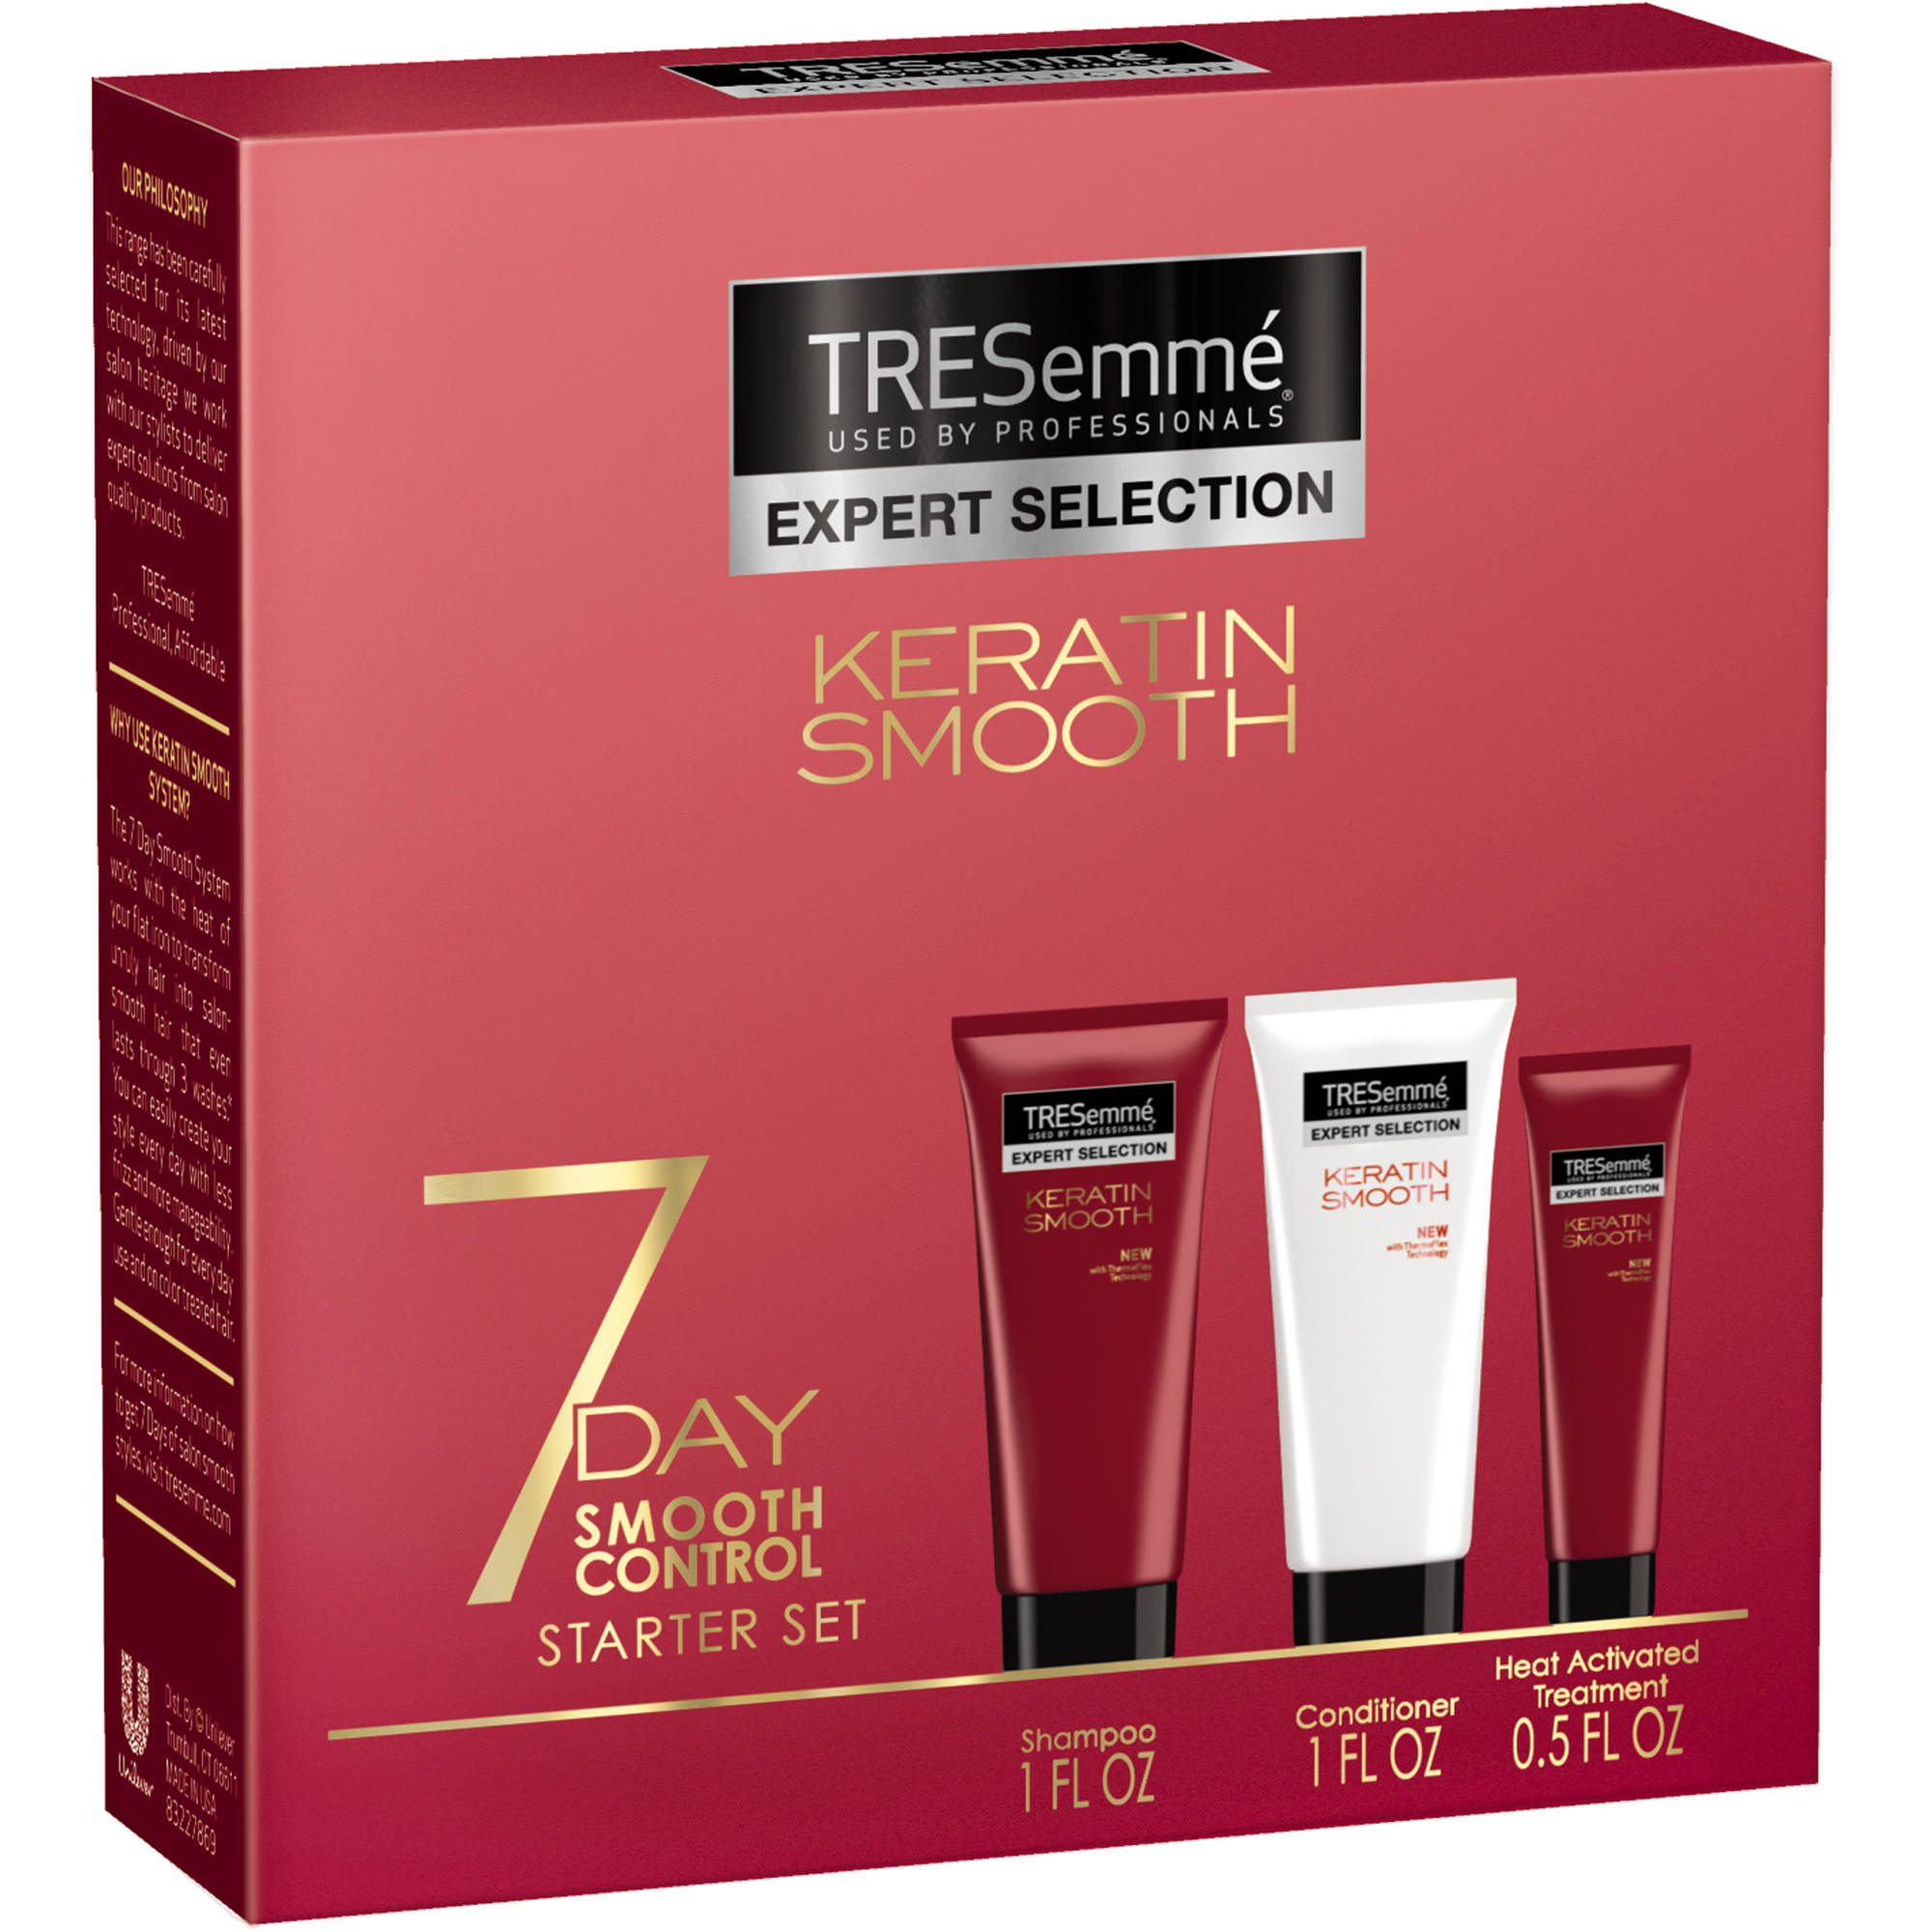 Tresemme Expert Selection Keratin Smooth 7 Day Smooth Control Starter Set - image 1 of 4